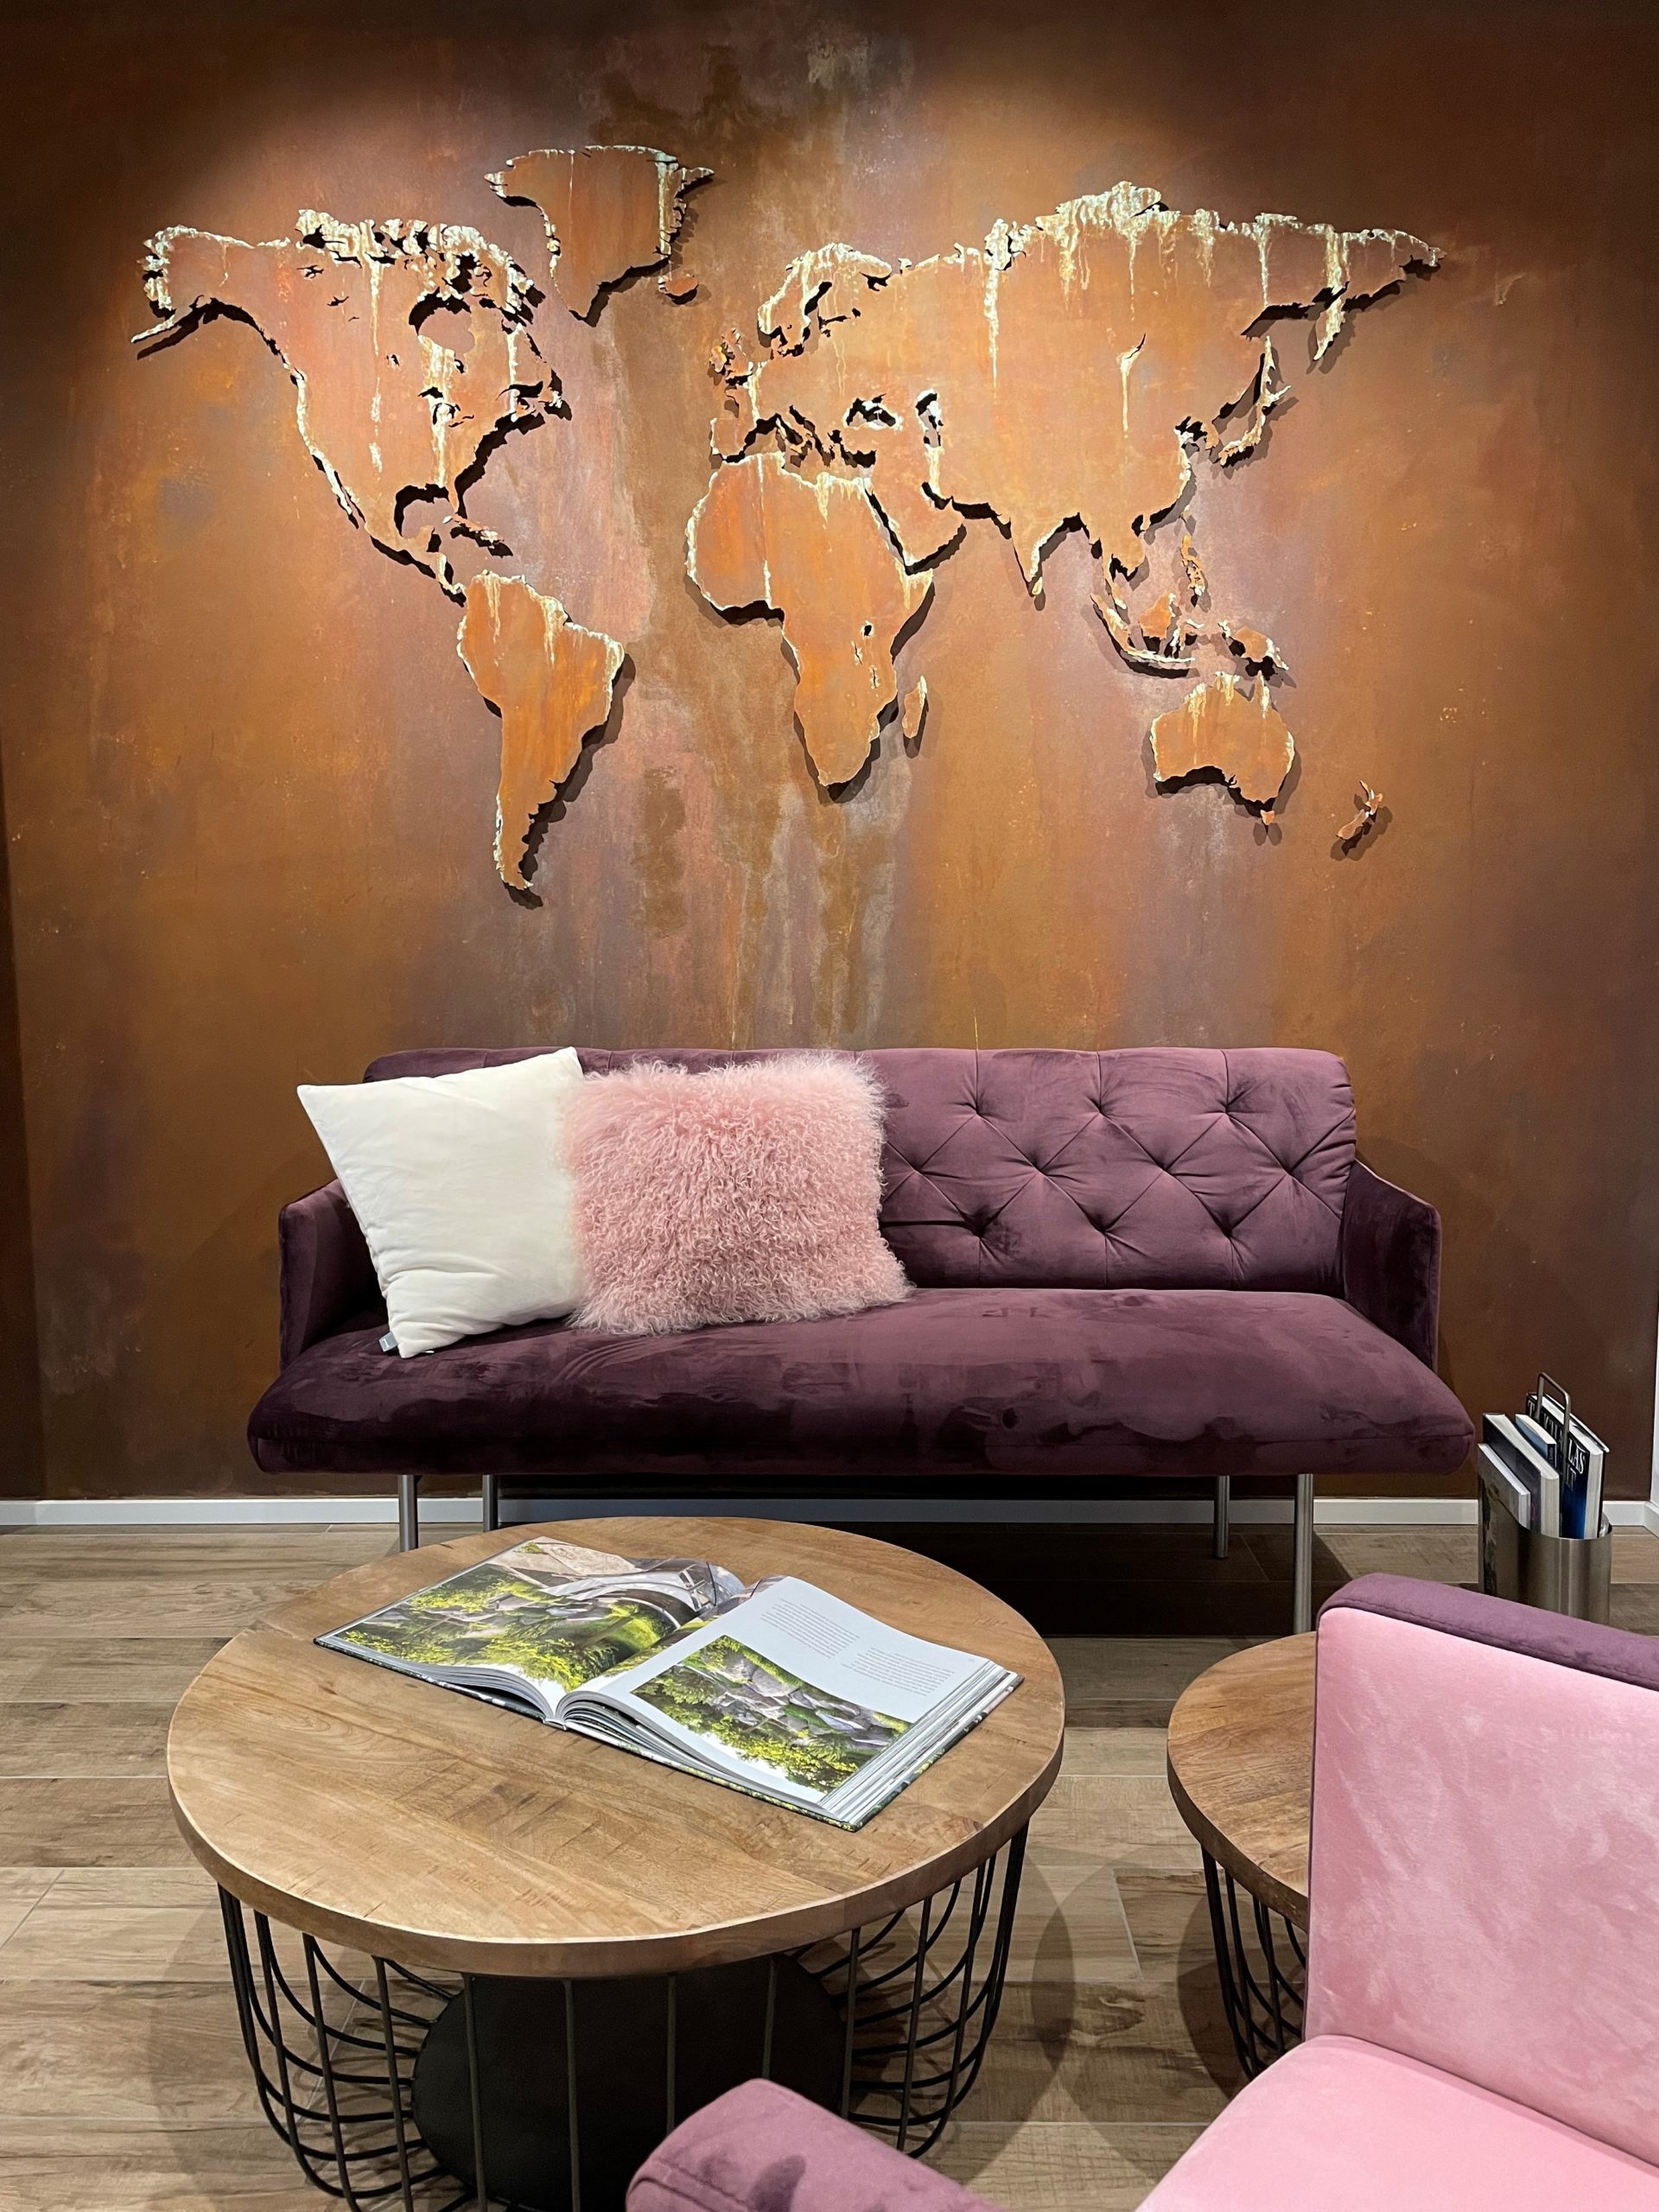 MapaWall world map Oak customized with rusty colors installed on a brown wall